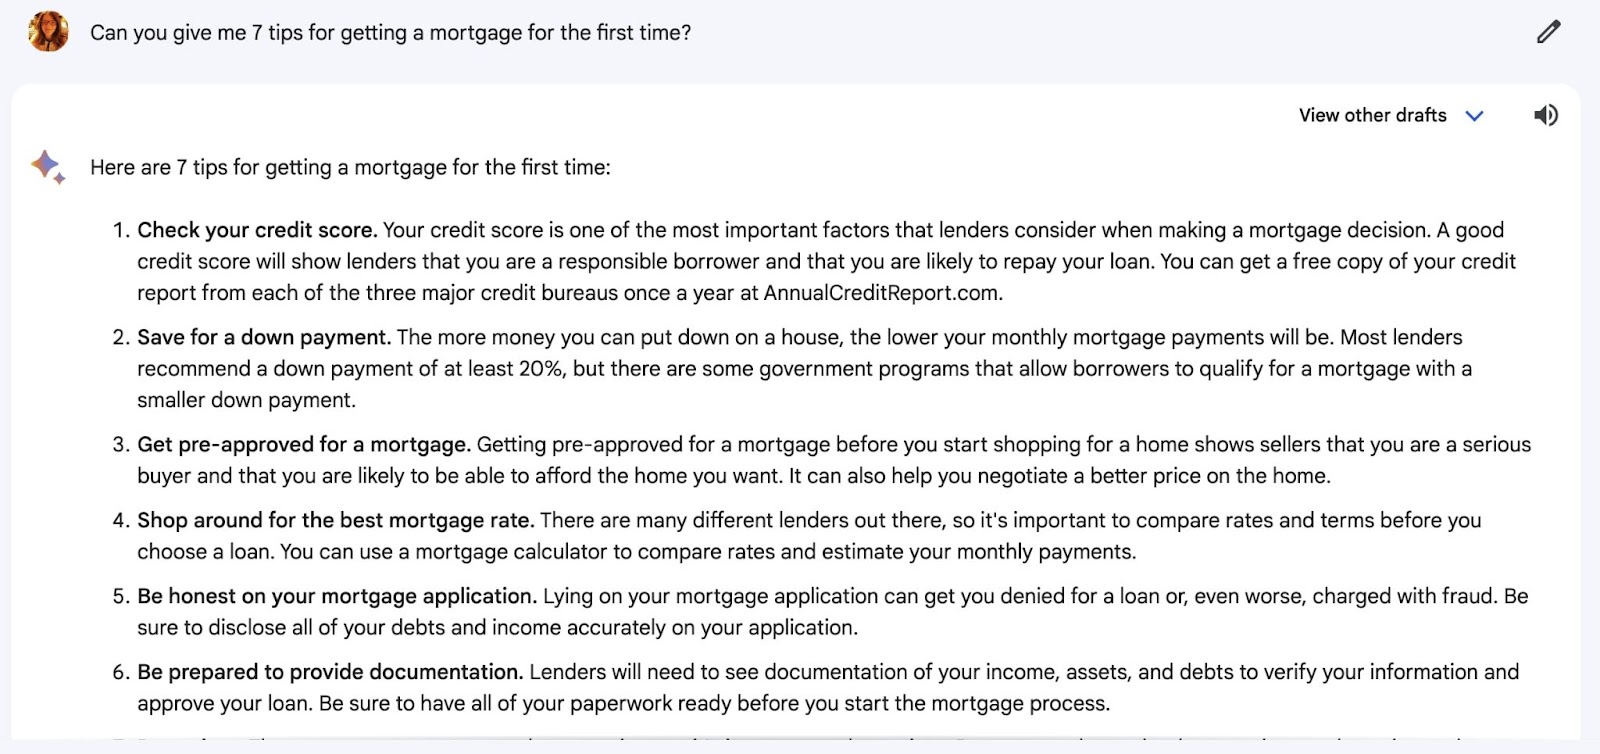 Bard's response to "Can you give me 7 tips for getting a mortgage for the first time?" prompt